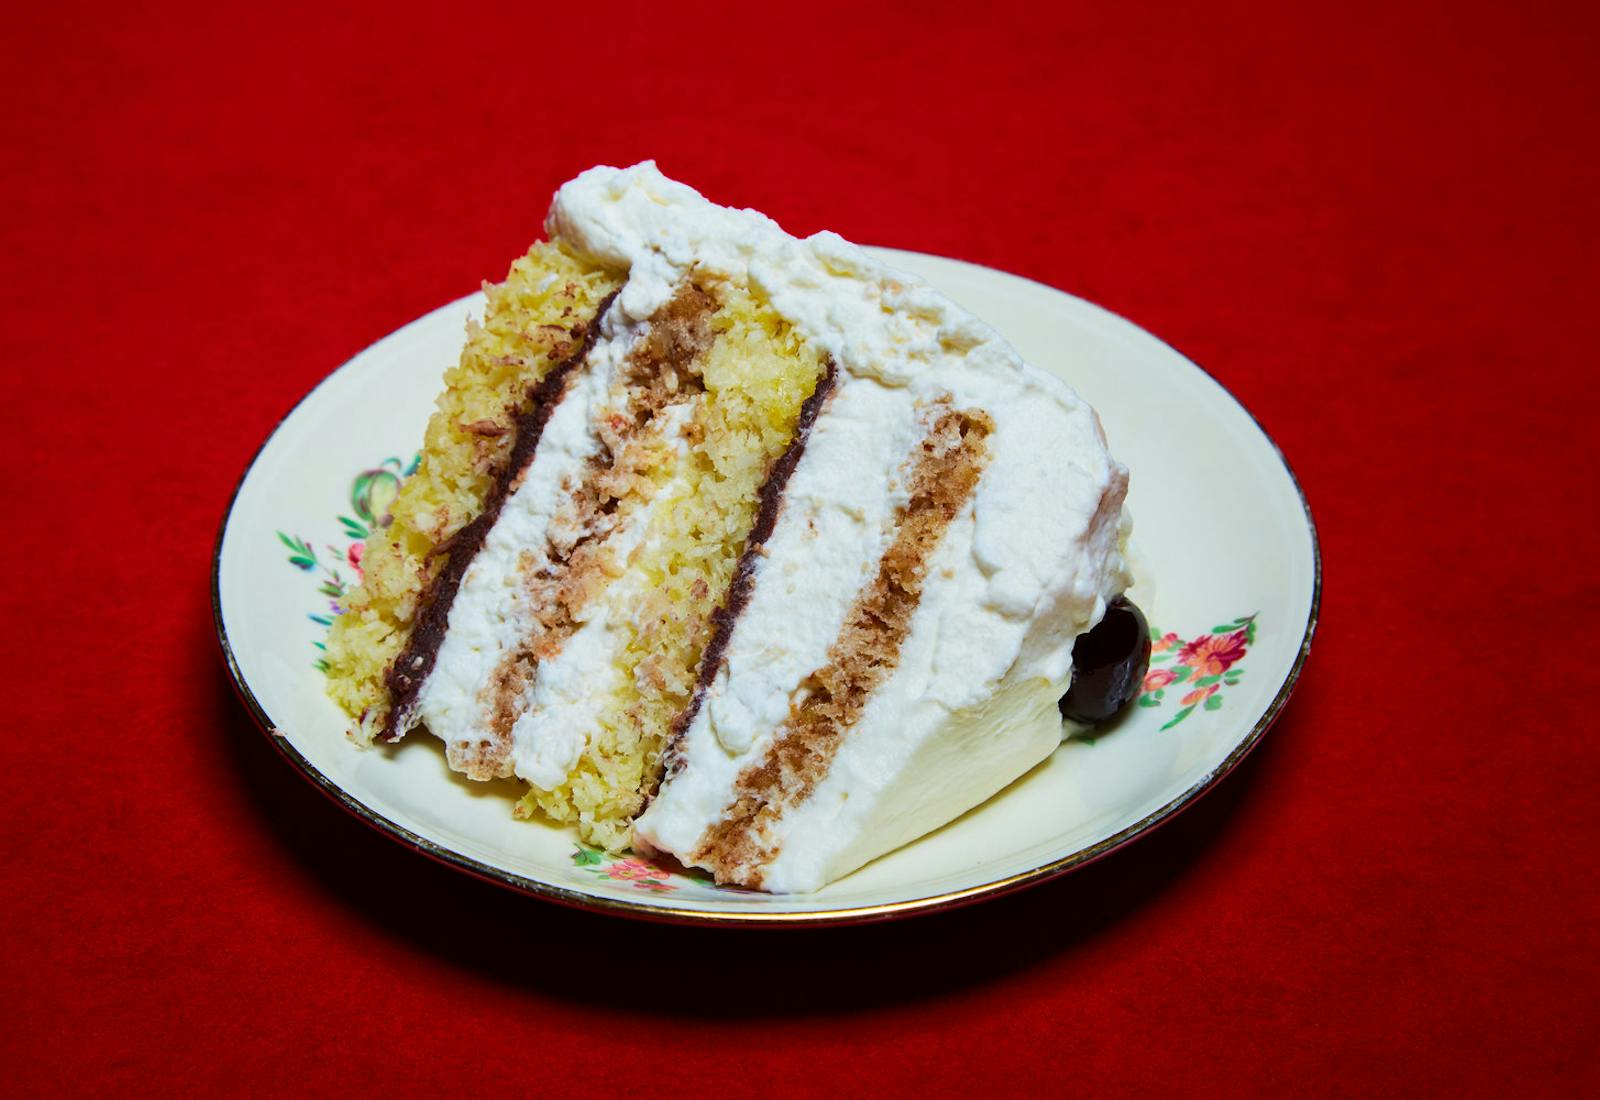 Slice of coconut macaroon layer cake on small floral dish atop red tablecloth.